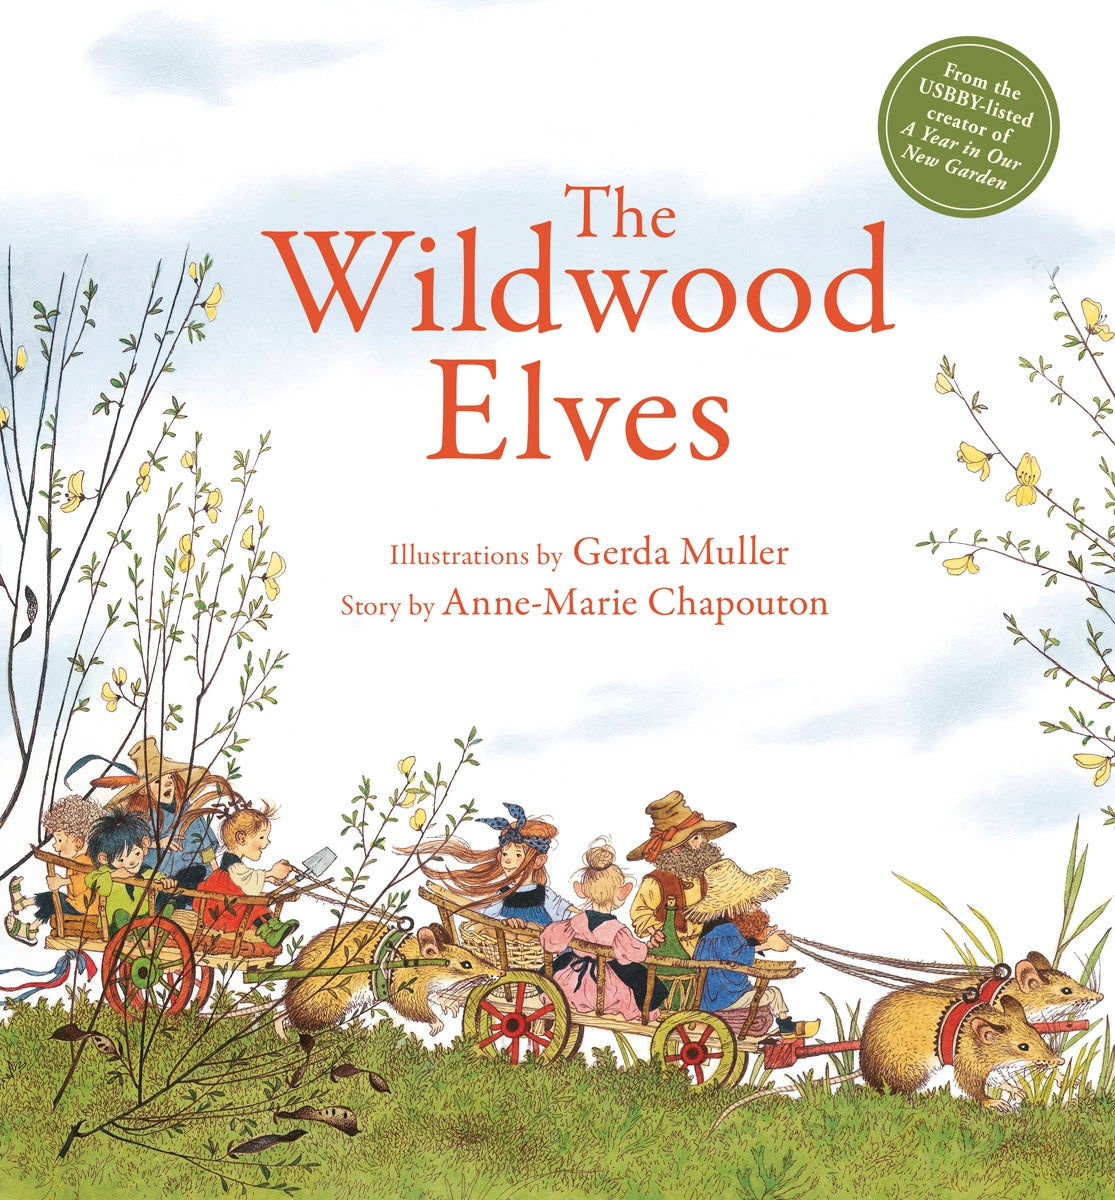 The Wildwood Elves by Anne-Marie Chapouton and Gerda Muller